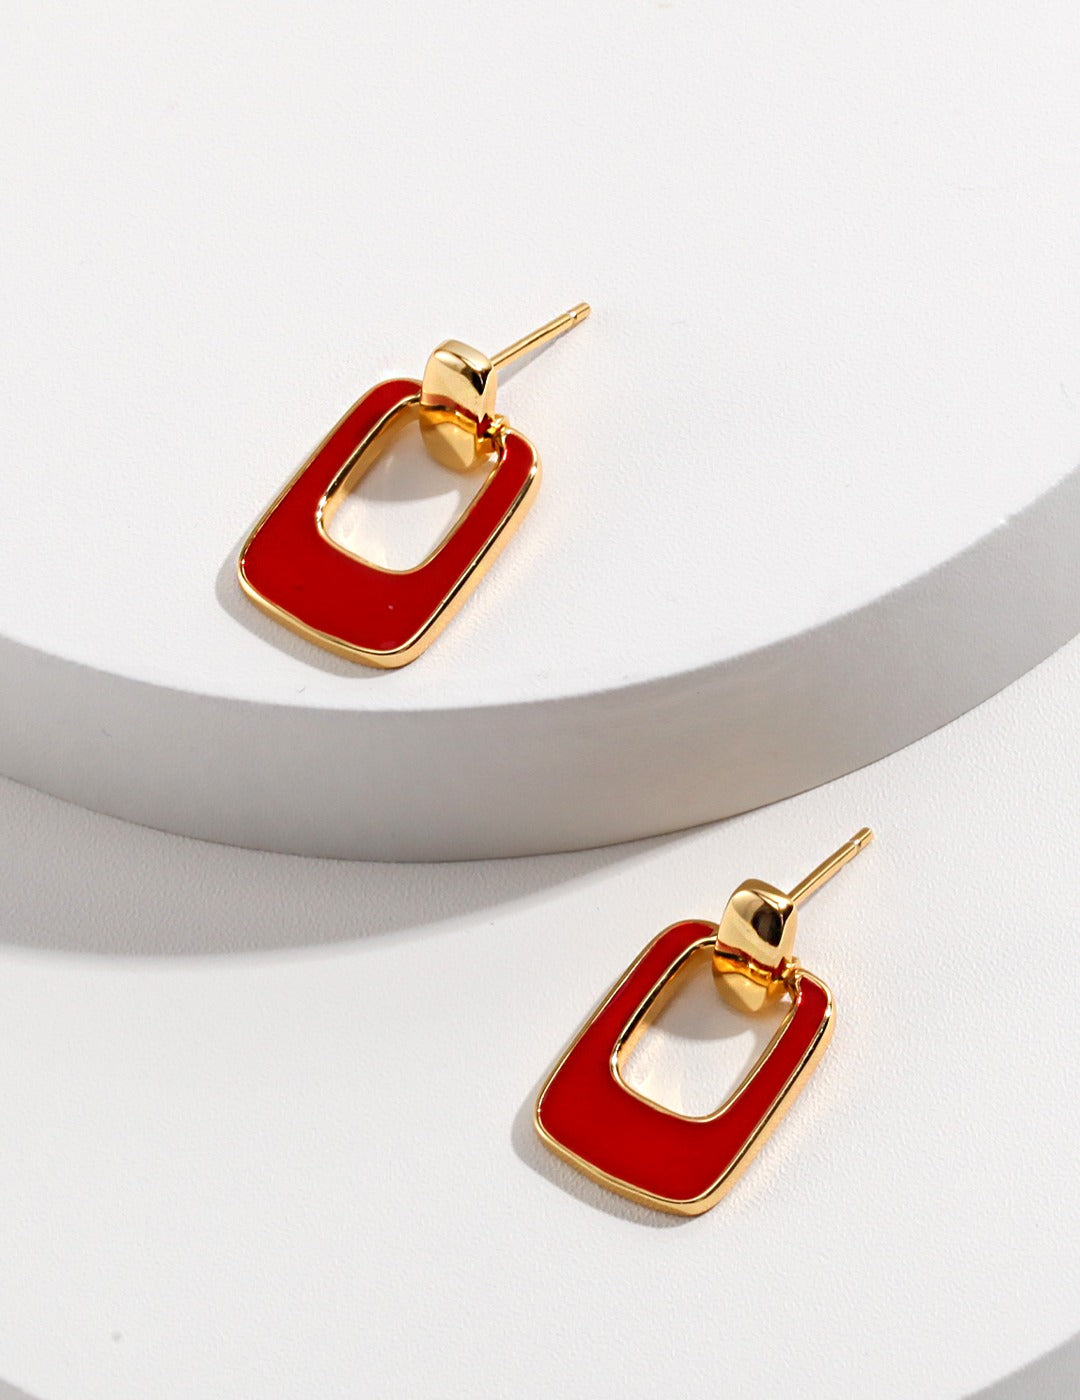 Retro Style Gold Earrings with Red Drop Glaze that looks stunning and elegant